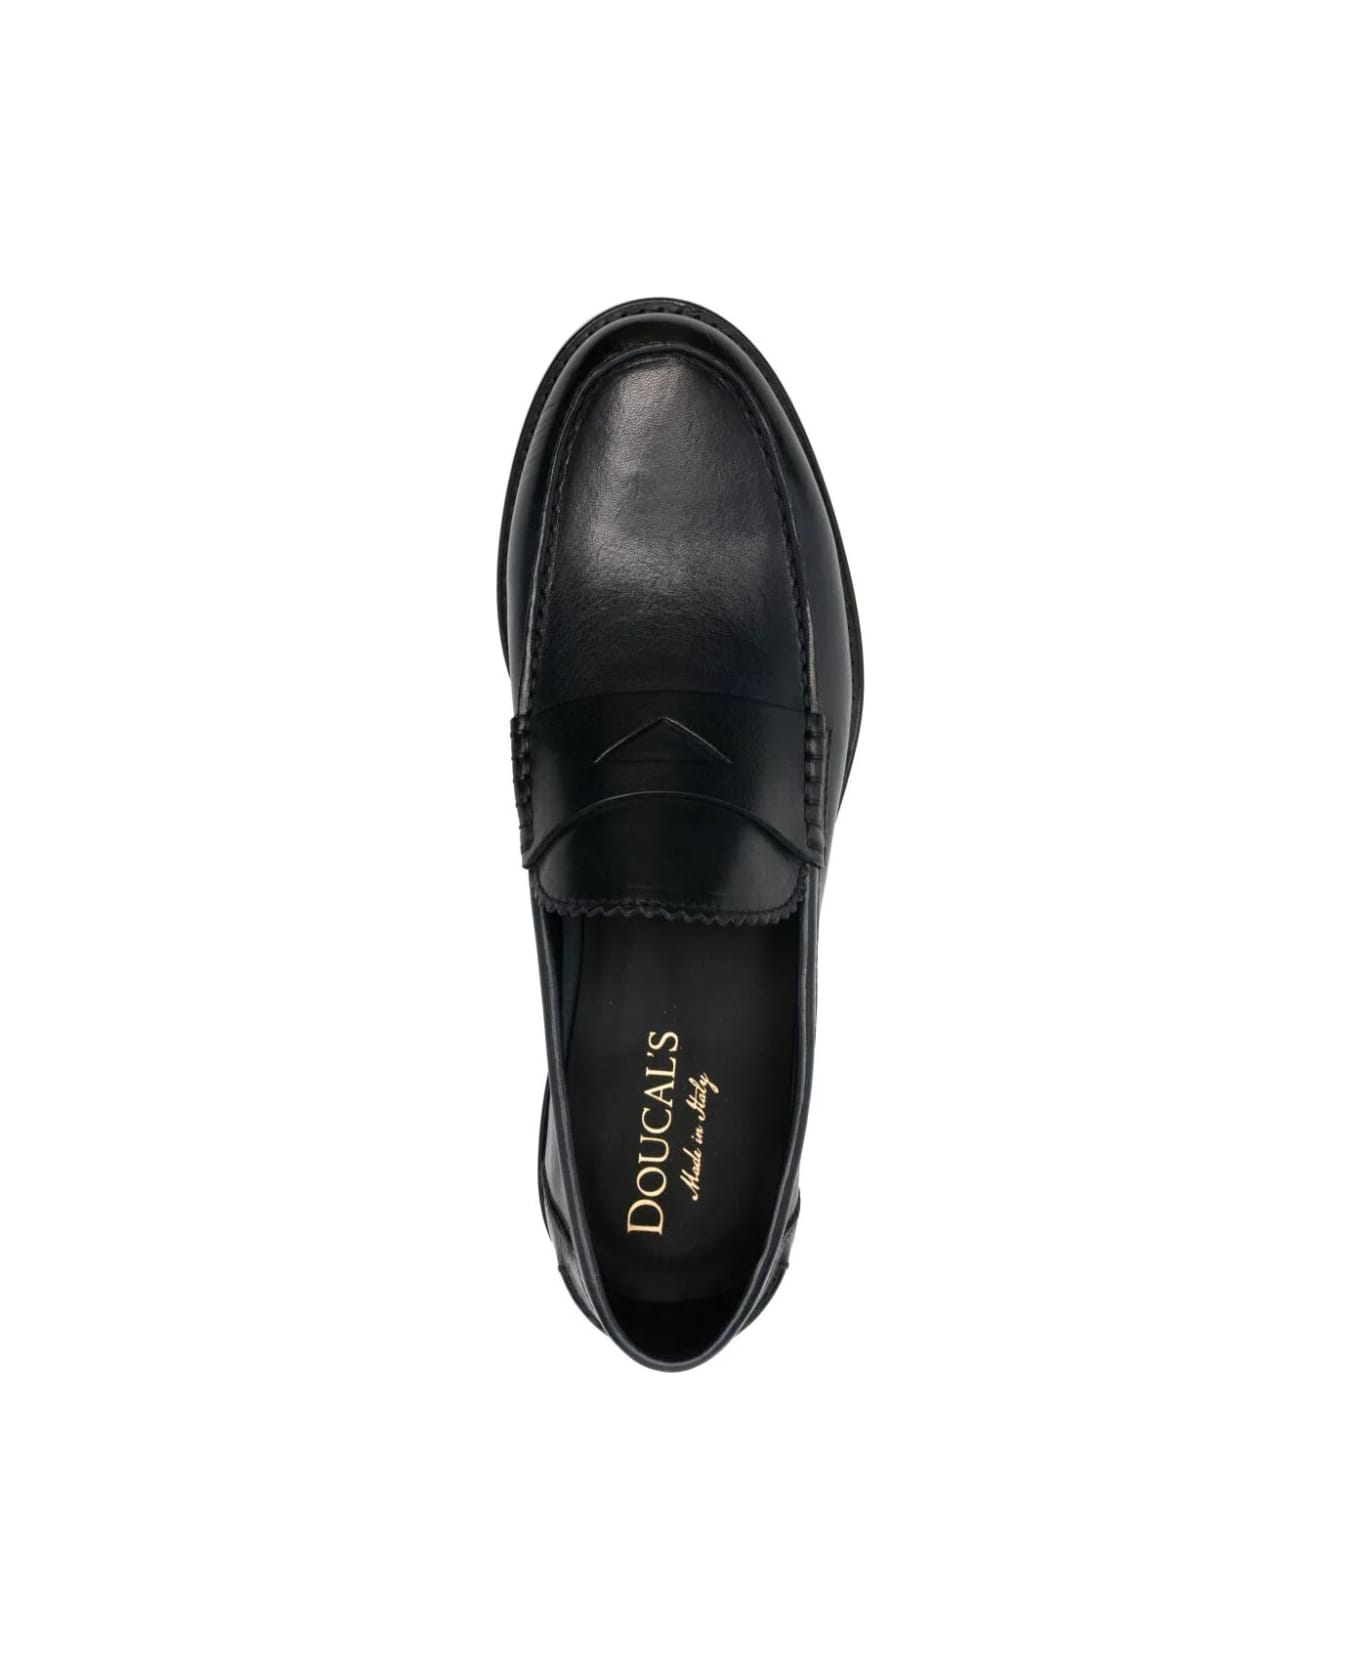 Doucal's Penny Loafer - Night